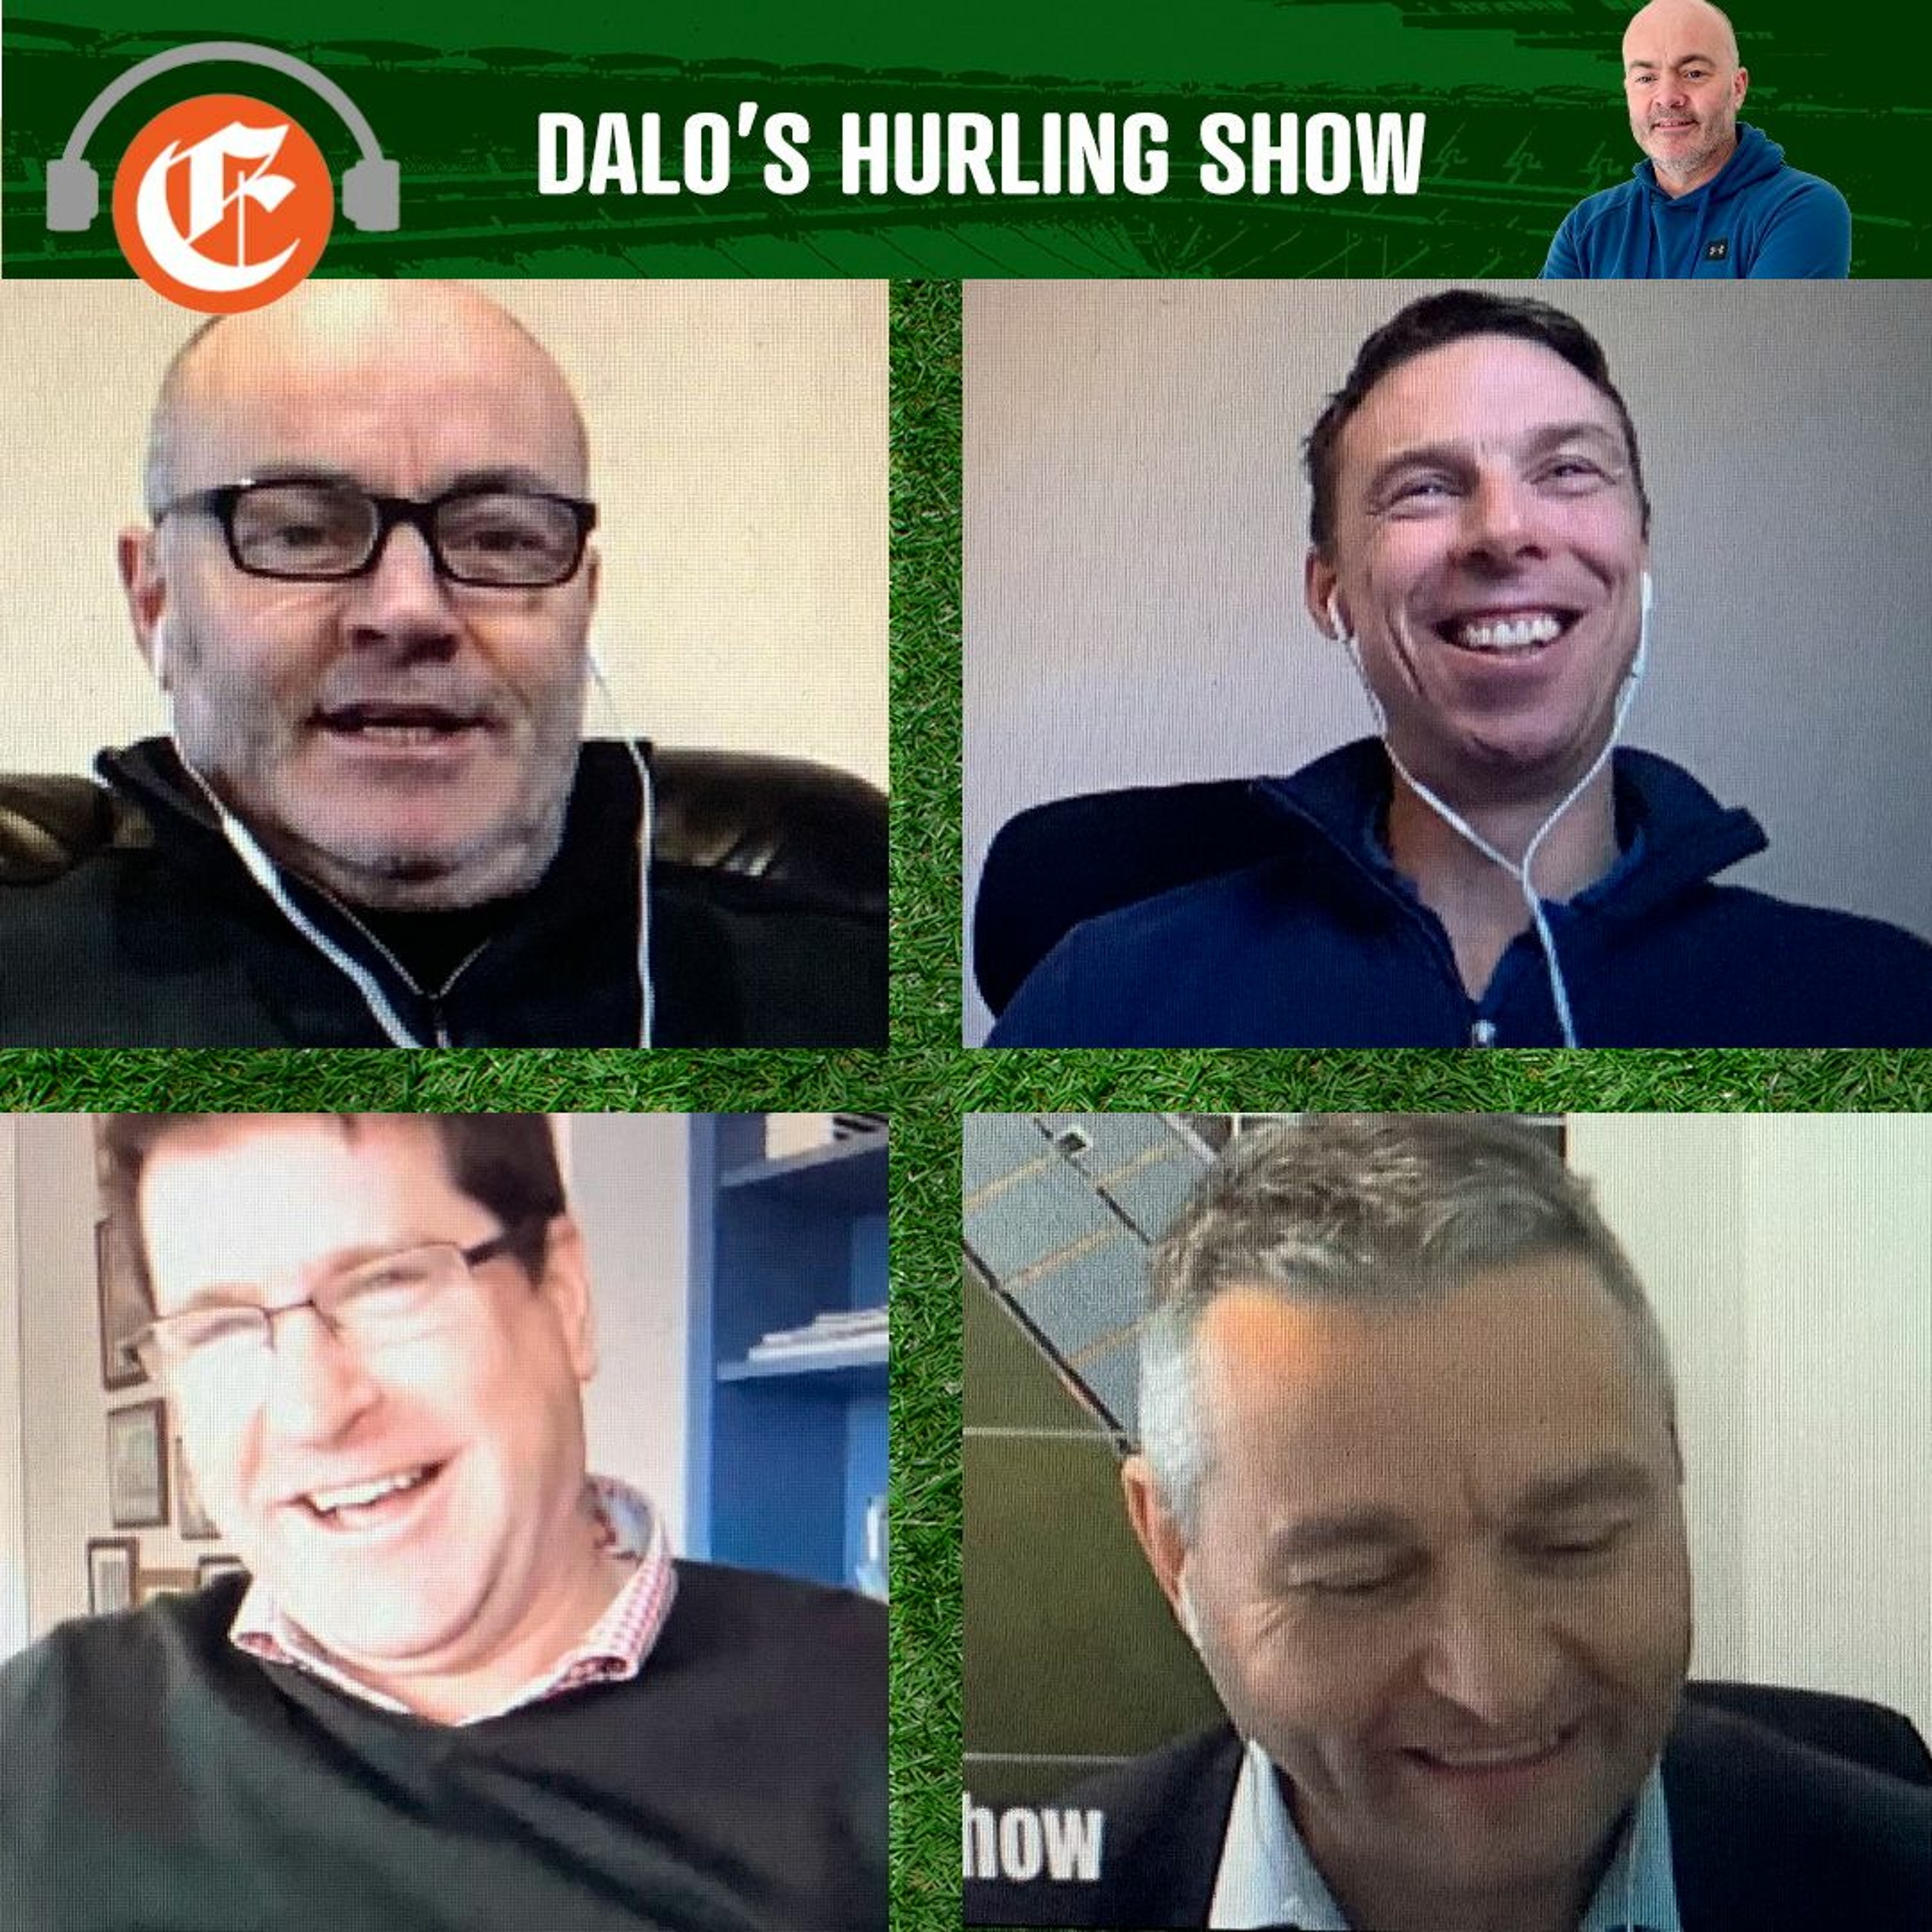 Dalo’s Hurling Show: Savage club entertainment shows we’ve nothing to fear from split season